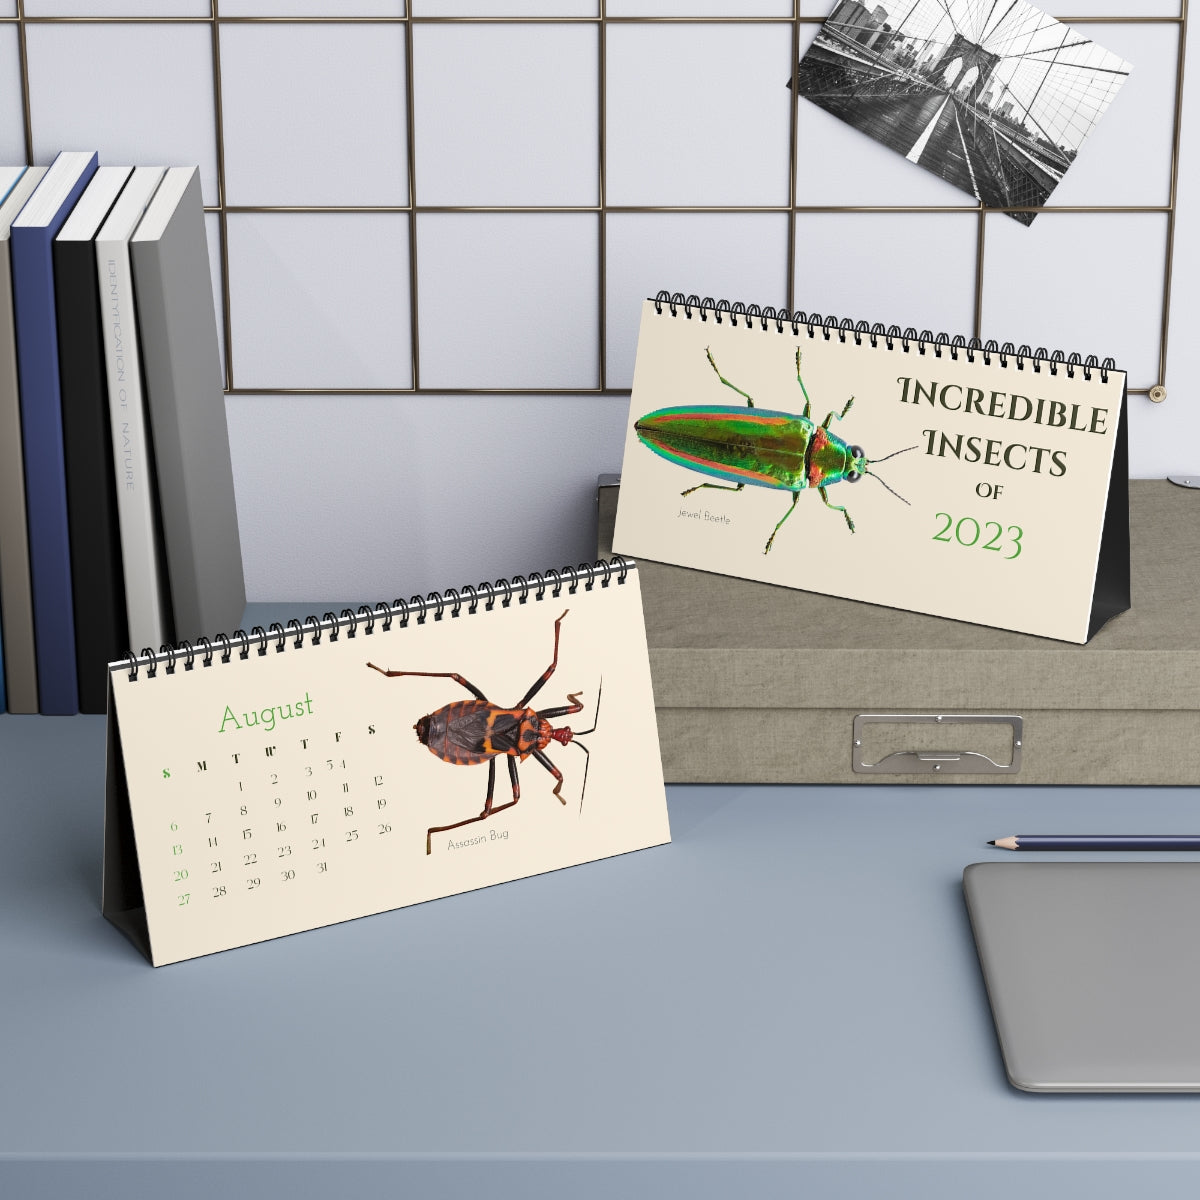 Incredible Insects of 20203 Desk Calendar